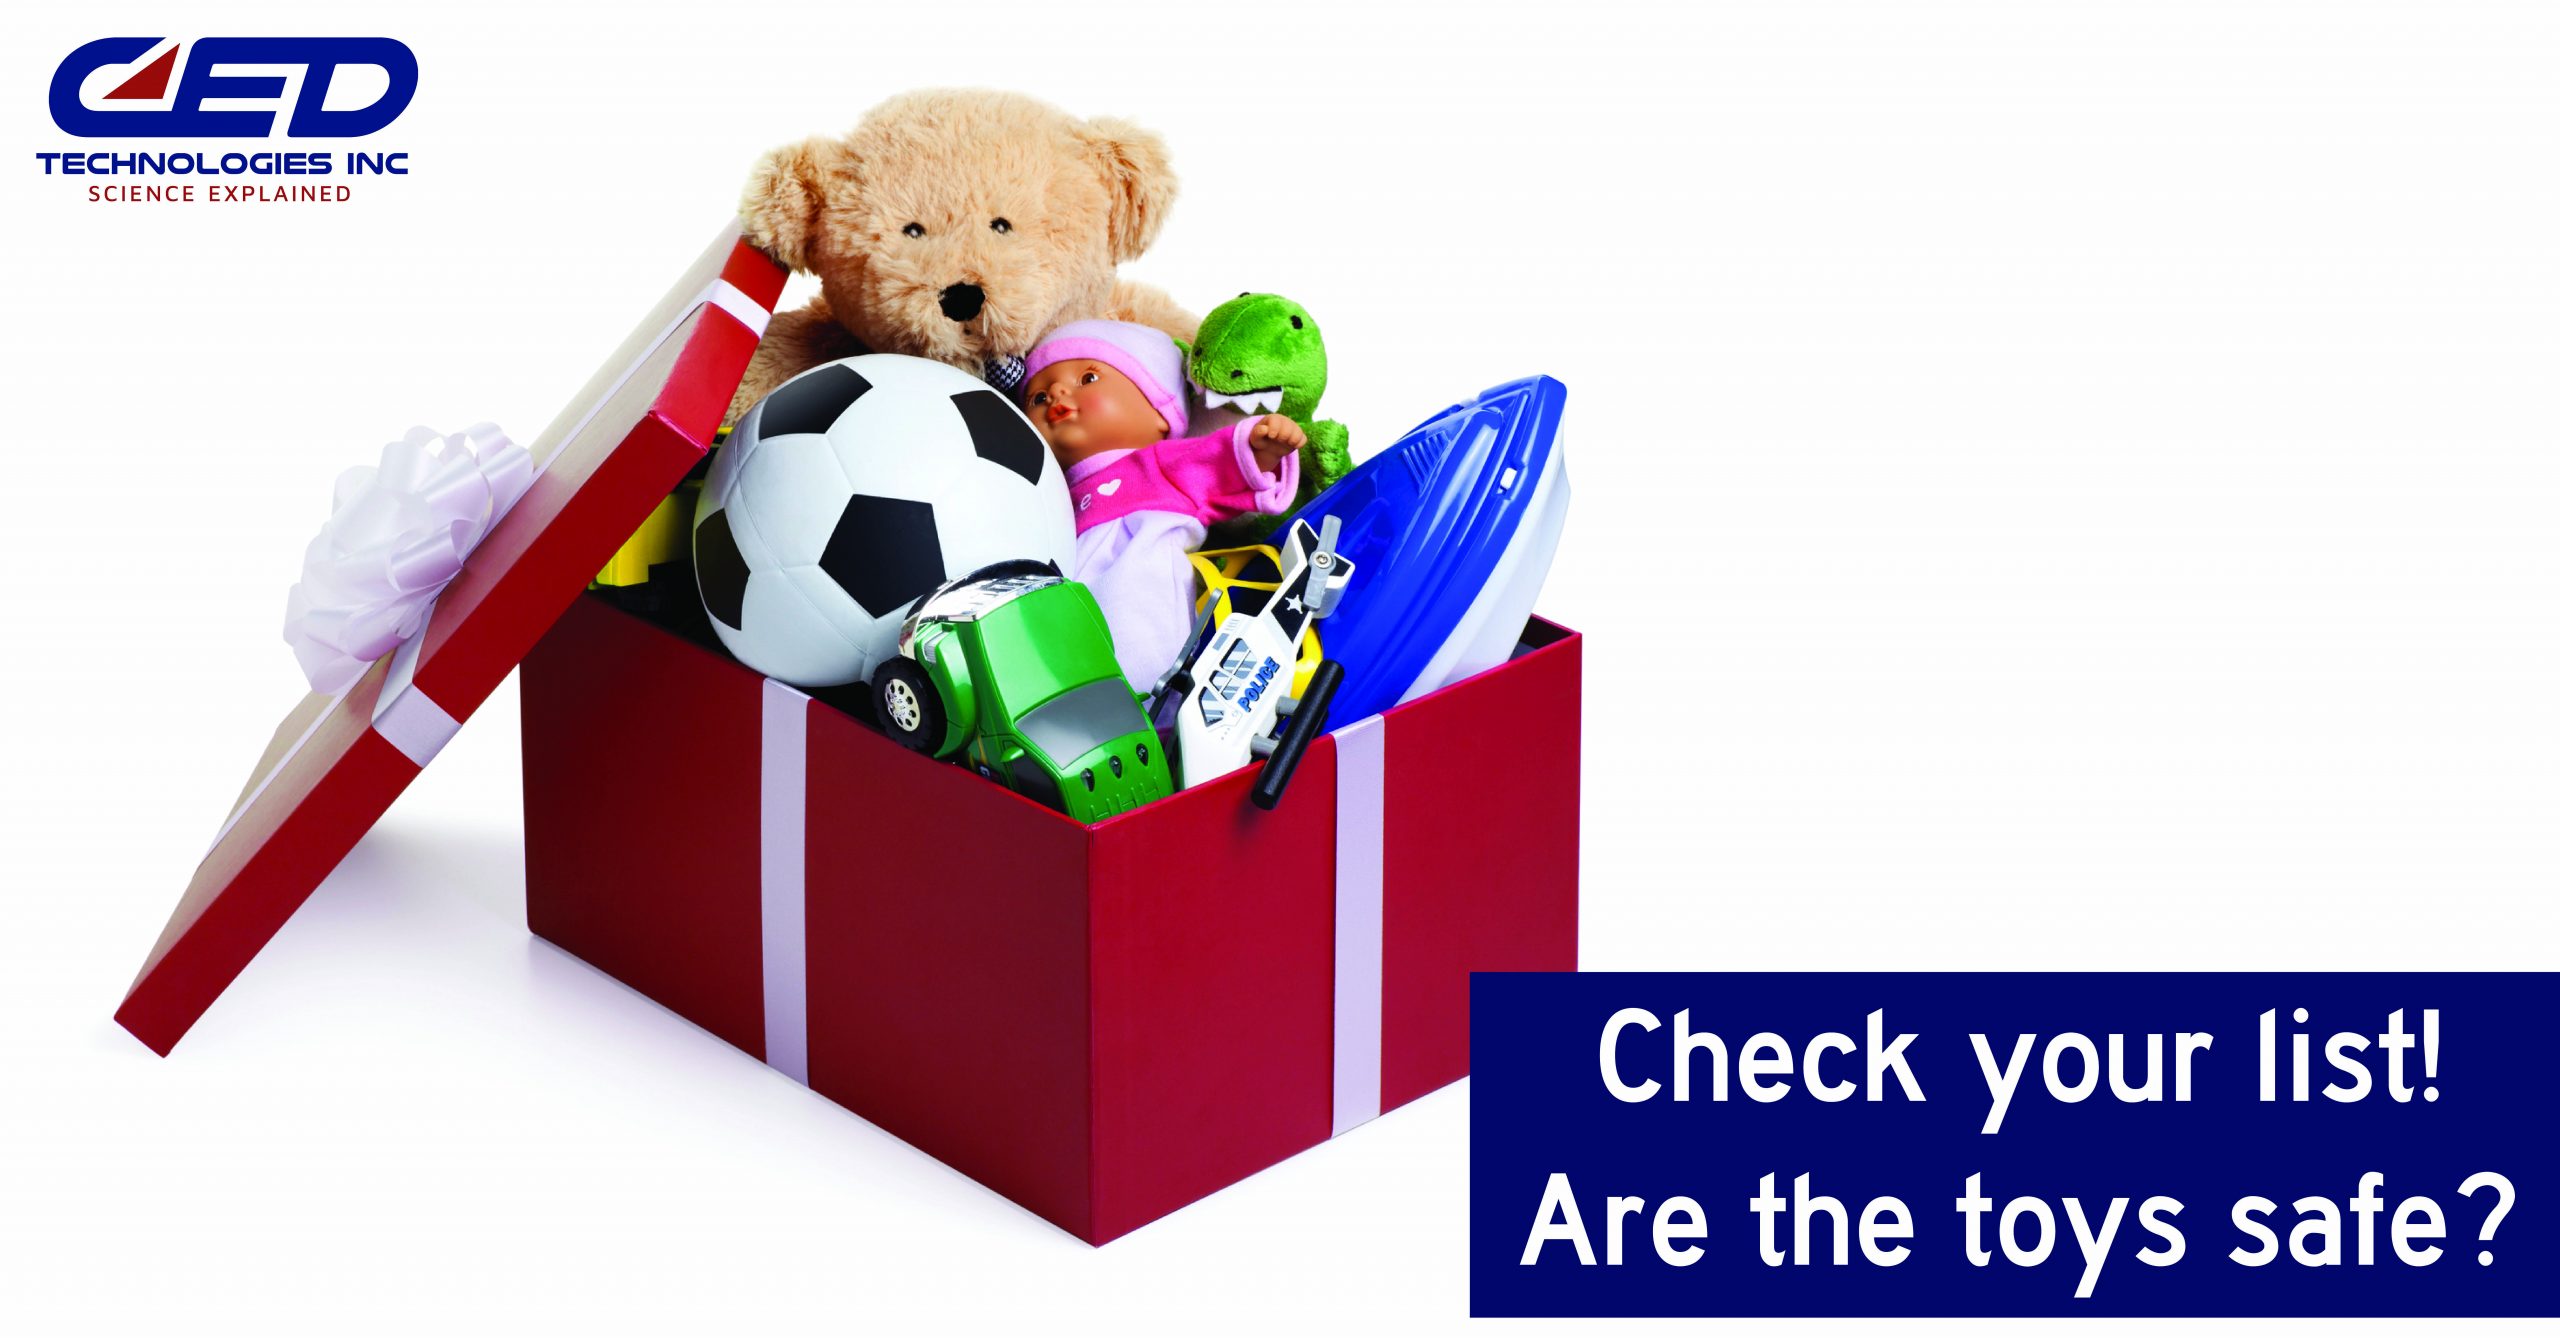 Check Your List Twice: Make Sure Your Toys are Safe Before Shopping